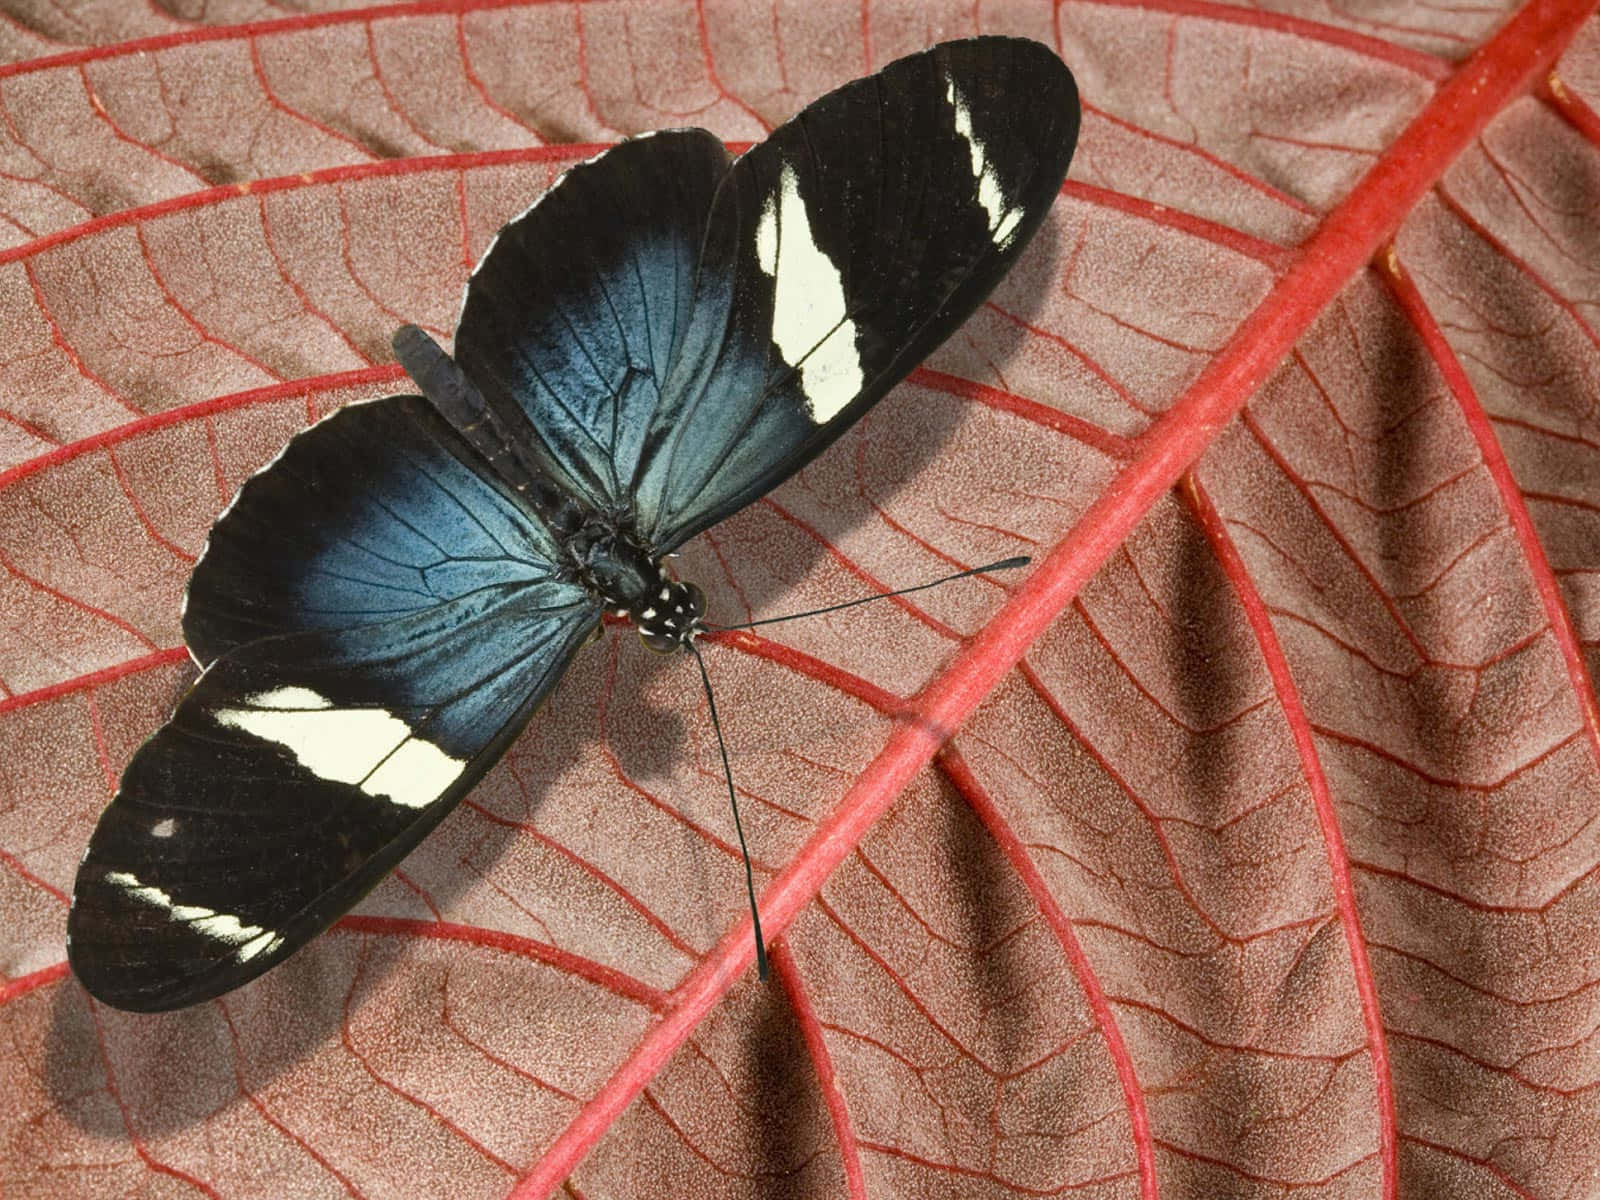 A Vivid Close-Up Photo of a Butterfly Species Wallpaper